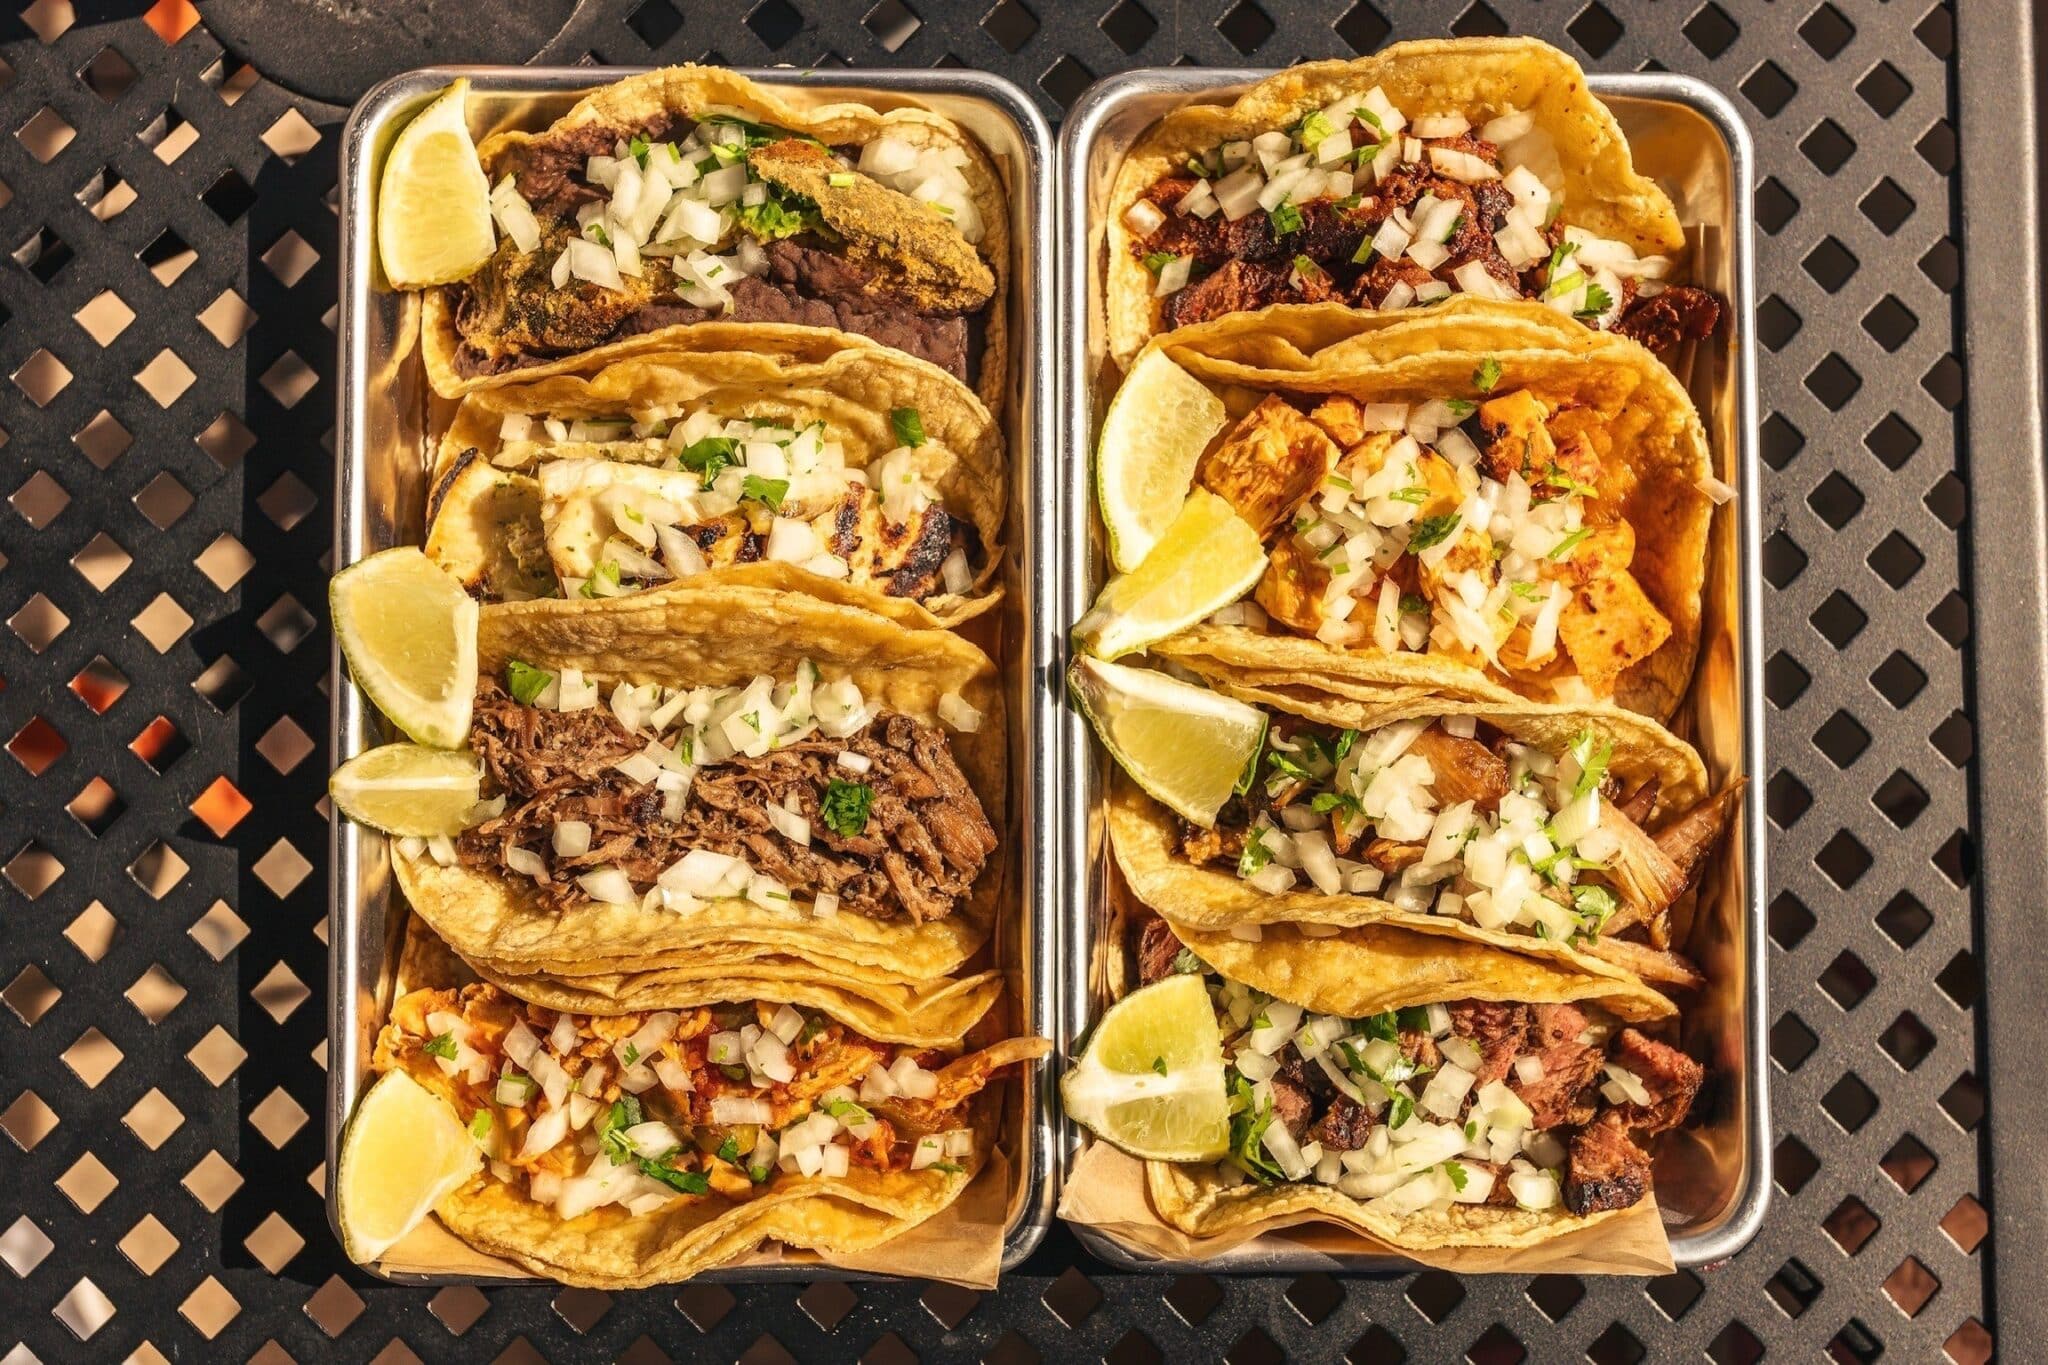 Rreal Tacos is expanding into Chamblee and Sandy Springs